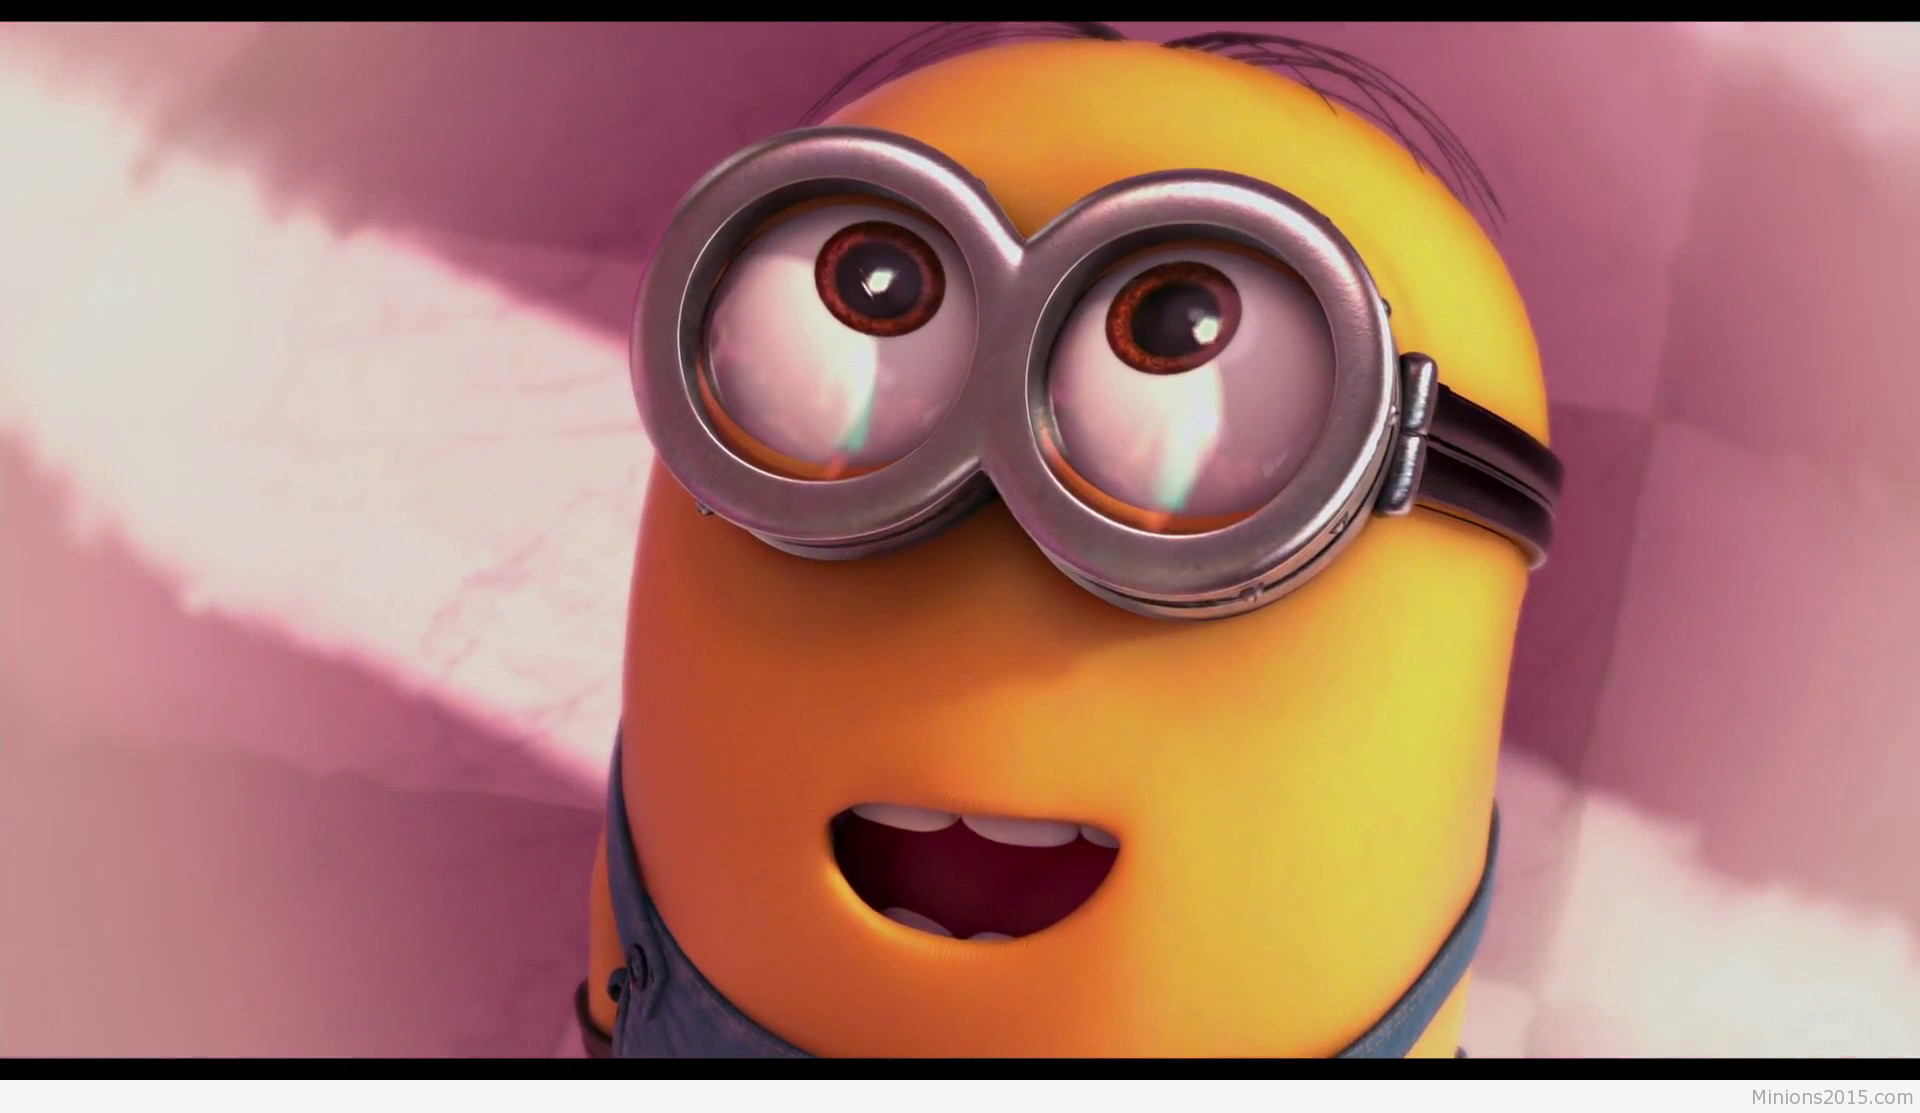 Minion Wallpaper Backgrounds 66 images